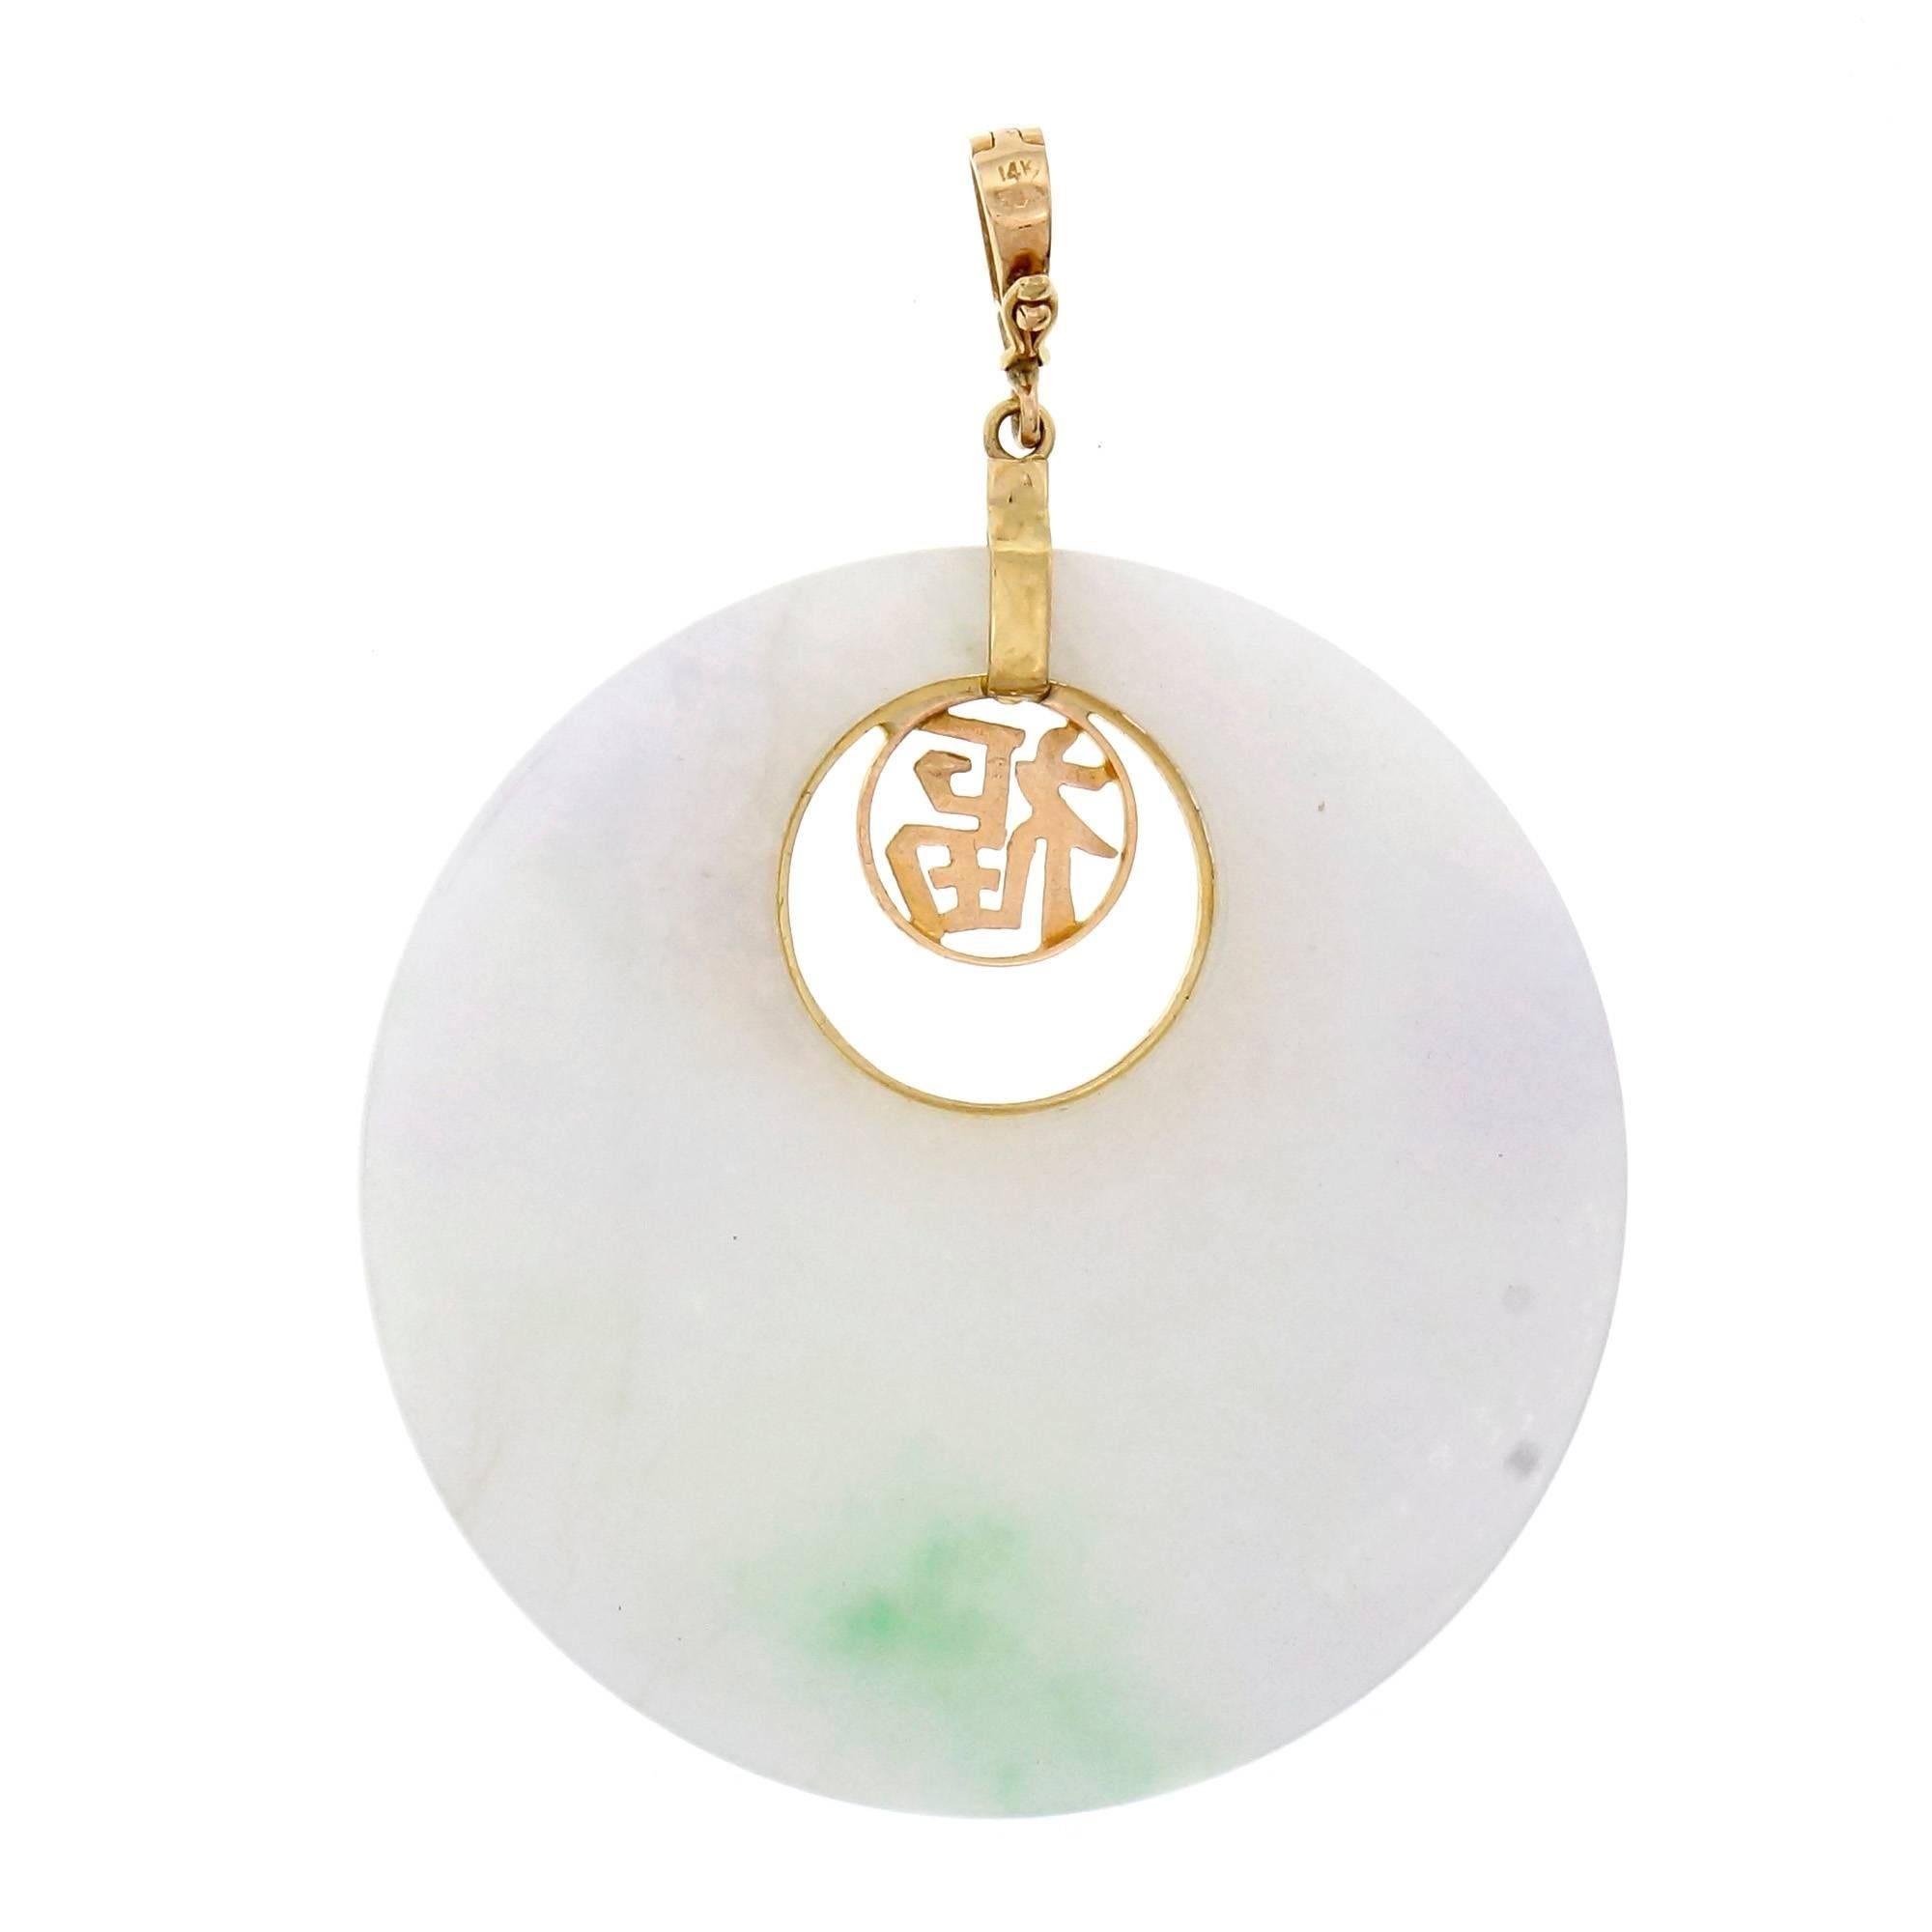 Natural fully carved and pierced Jadeite Jade pendant with 14k gold top and bail. Translucent with natural blended shades of green color.

14k yellow gold
1 pierced carver mottled green Jadeite Jade, 45.99 x 22.5 x 7.34mm, GIA certificate